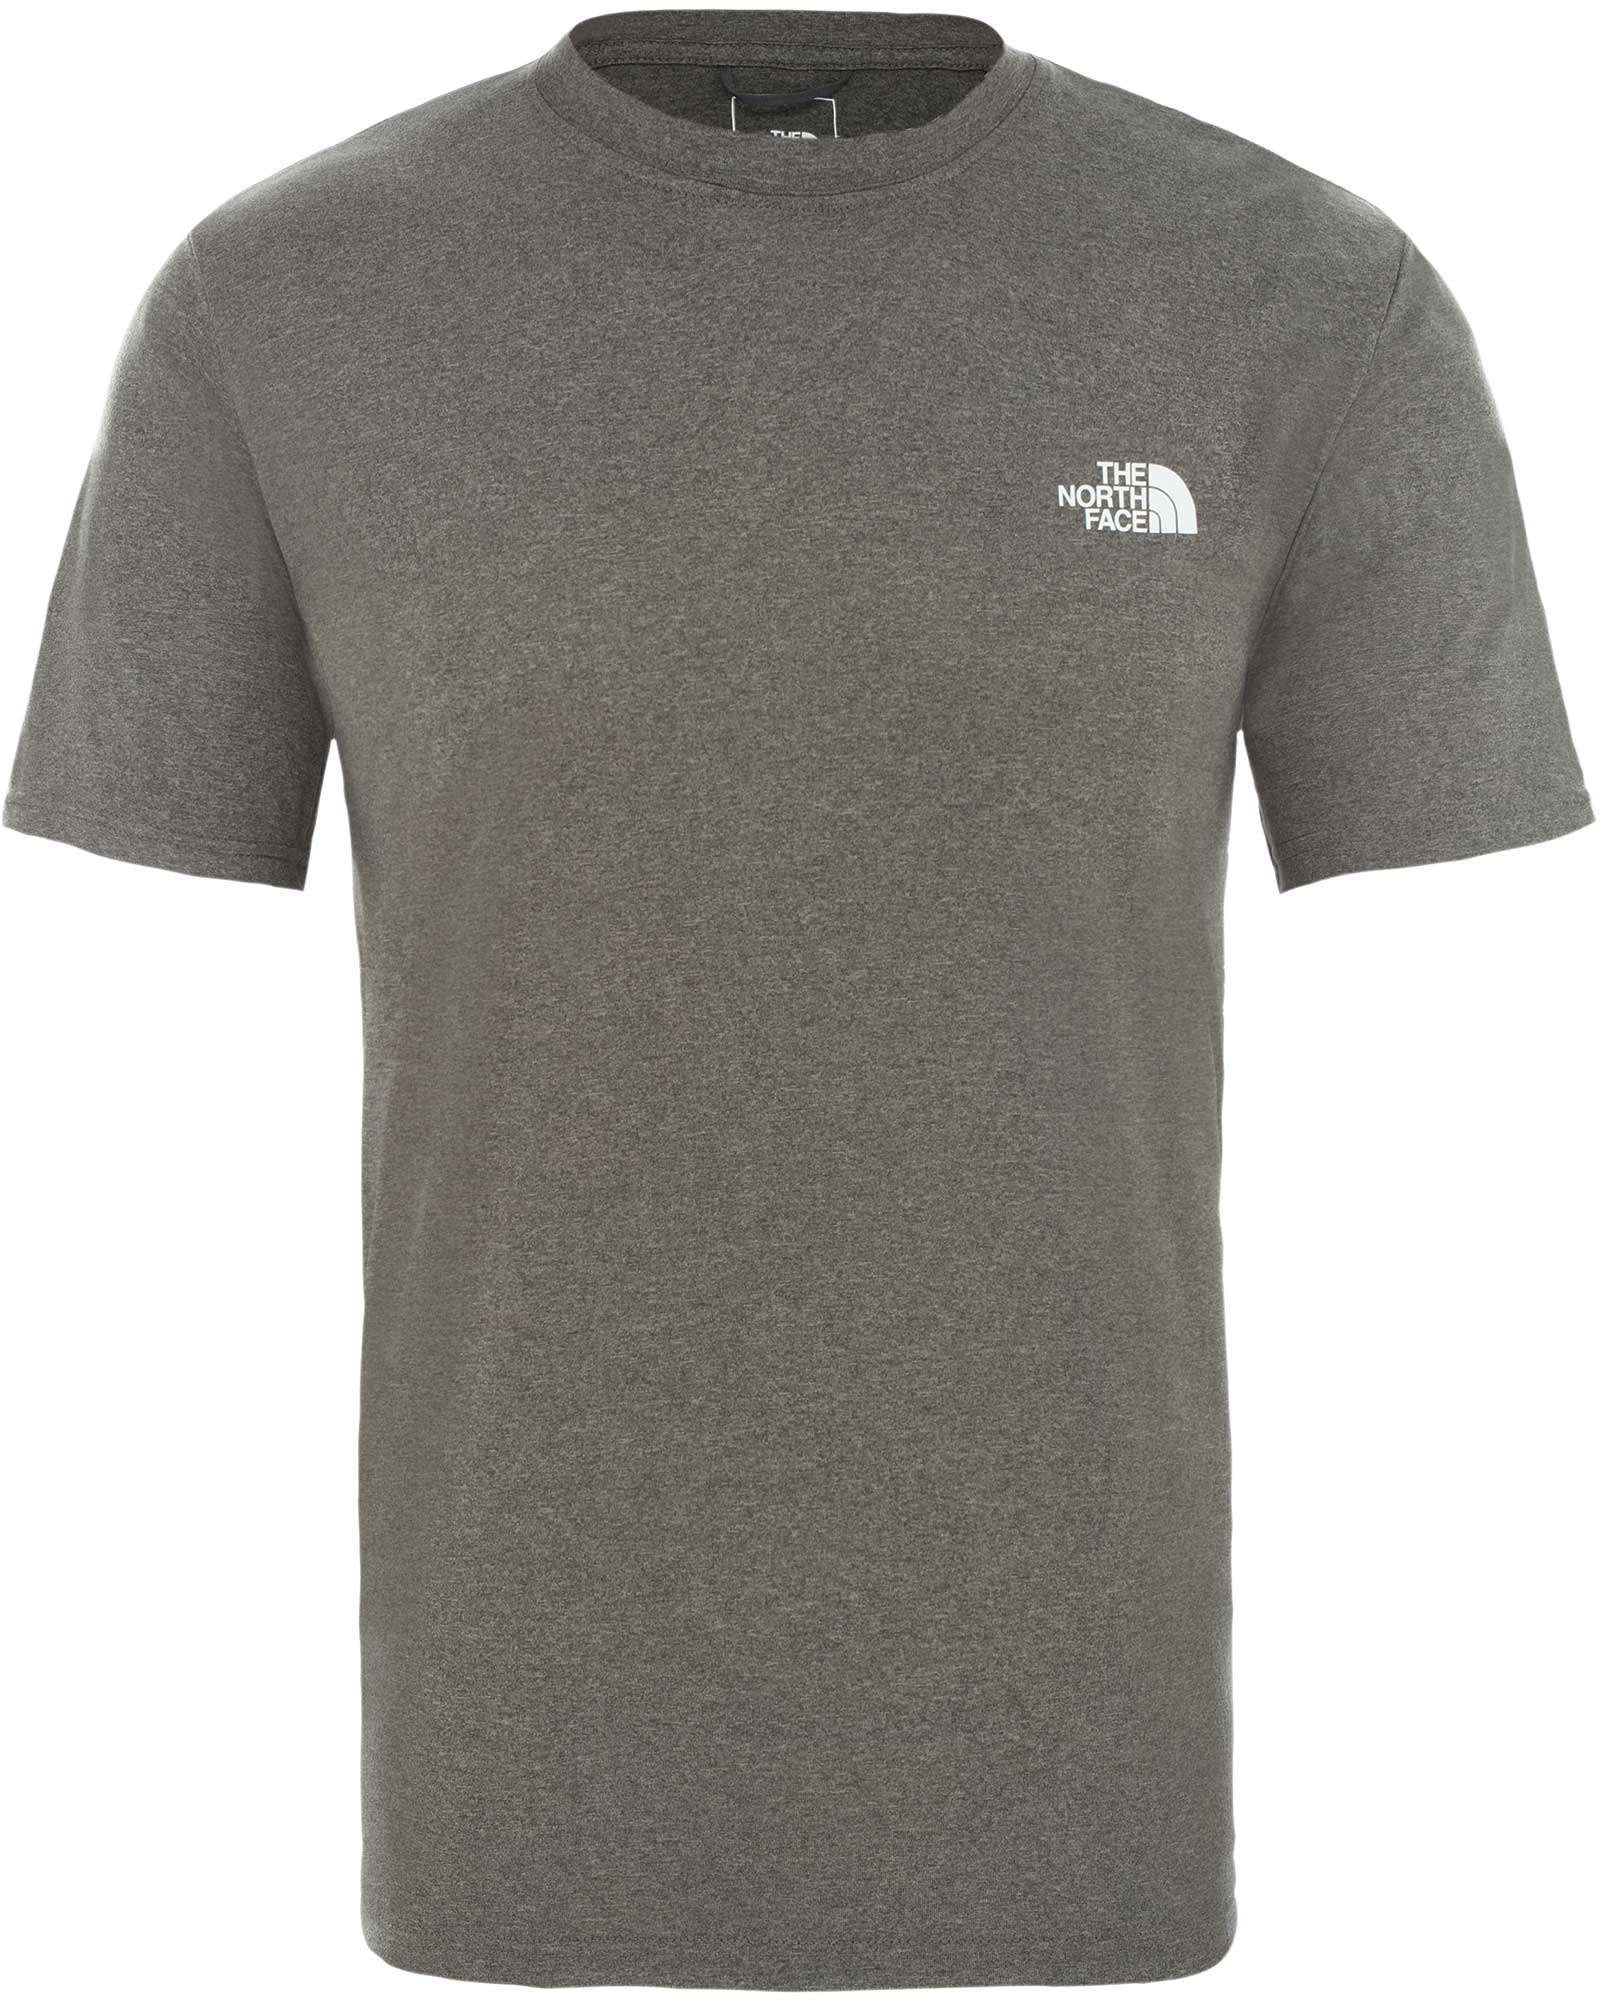 The North Face Reaxion Amp Men’s Crew T Shirt - New Taupe Green Heather M